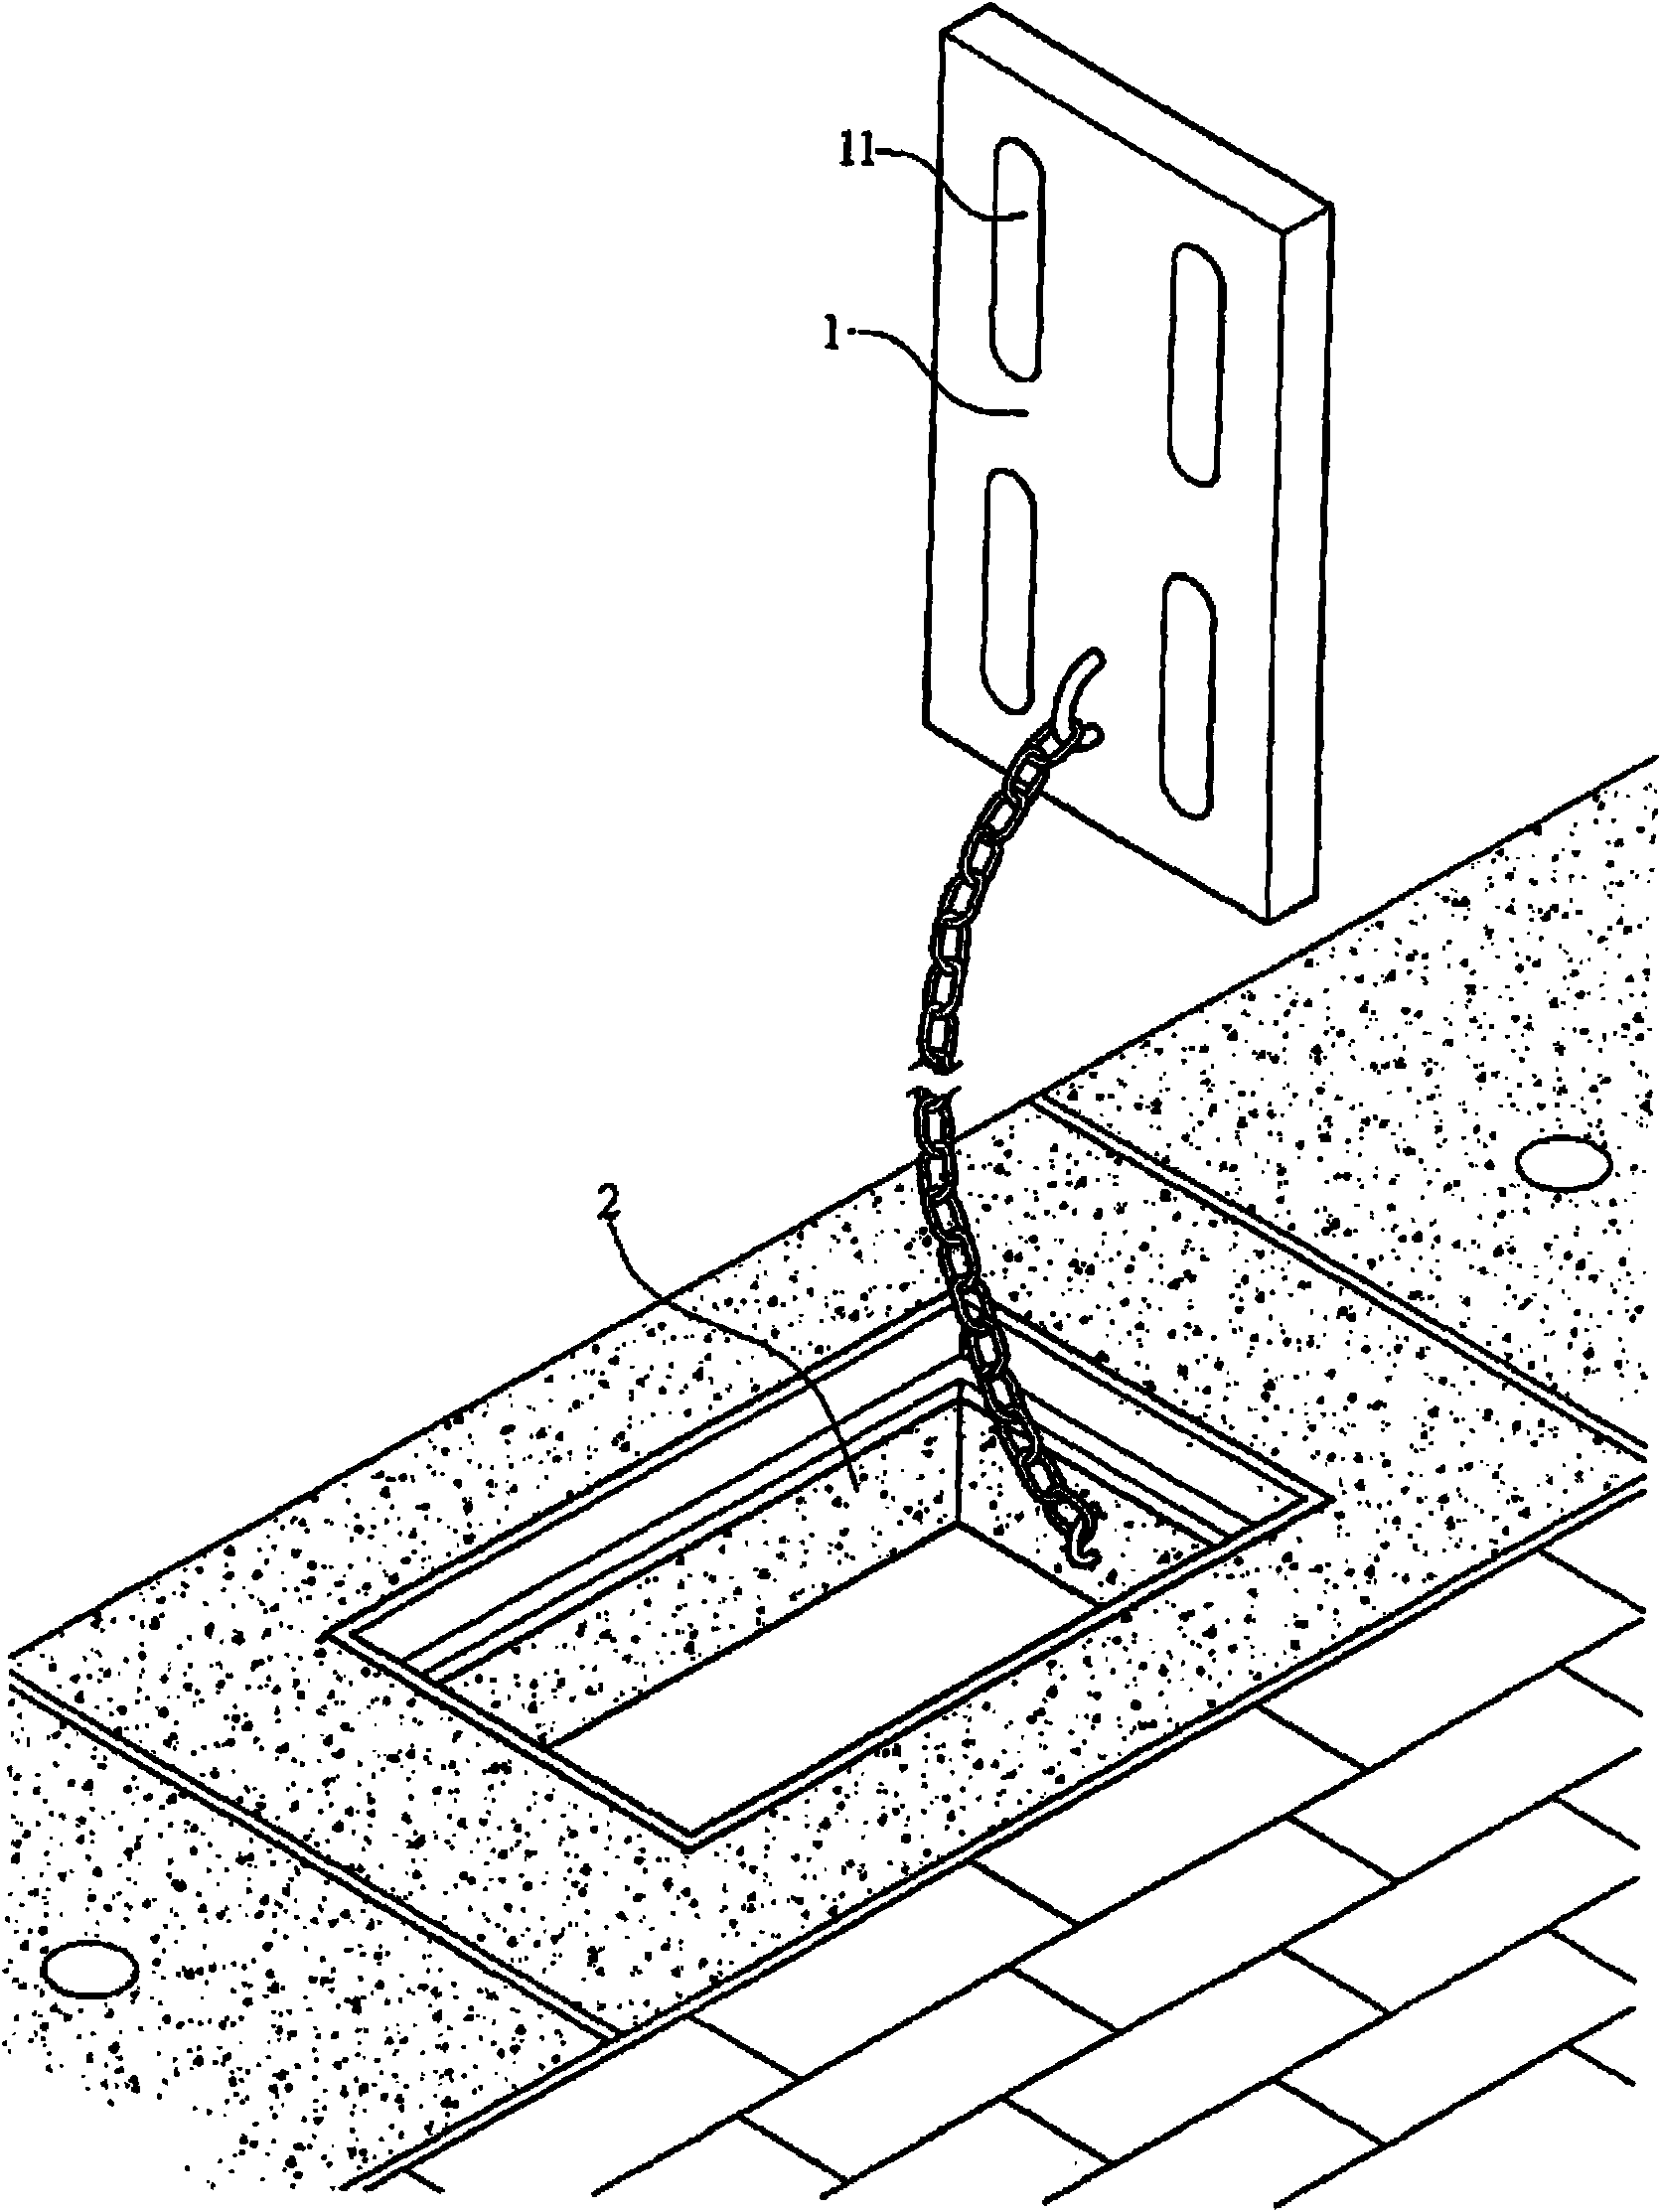 Drainage ditch cover and gas blocking disk thereof